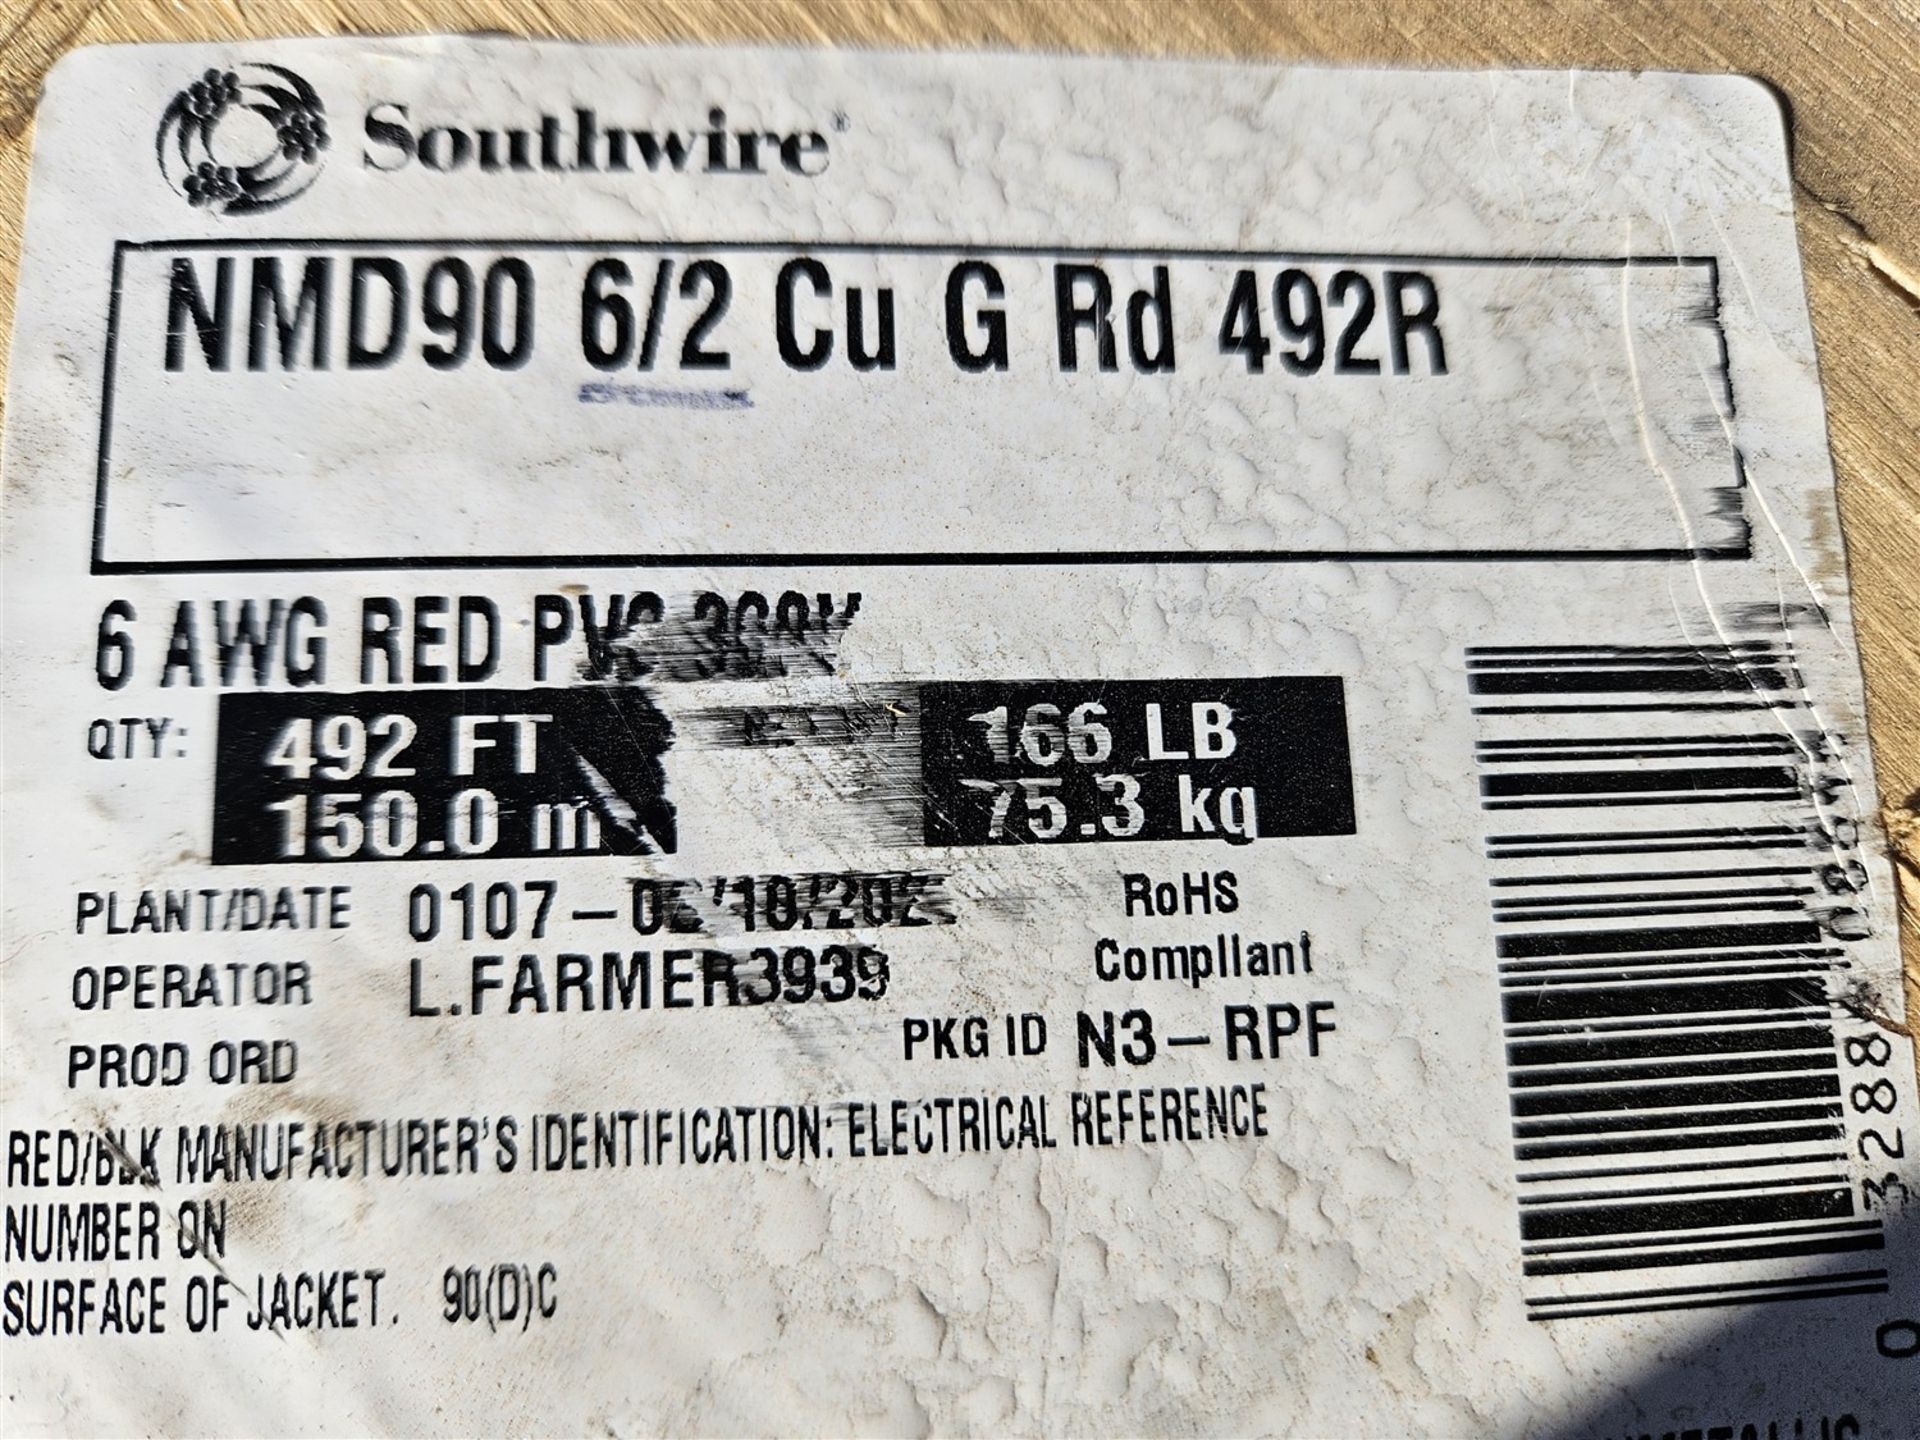 REEL OF 6-2C 7 STR NMD90 300V 1- APPROX. 400 FT. (COST $1677) - COPPER - Image 3 of 7